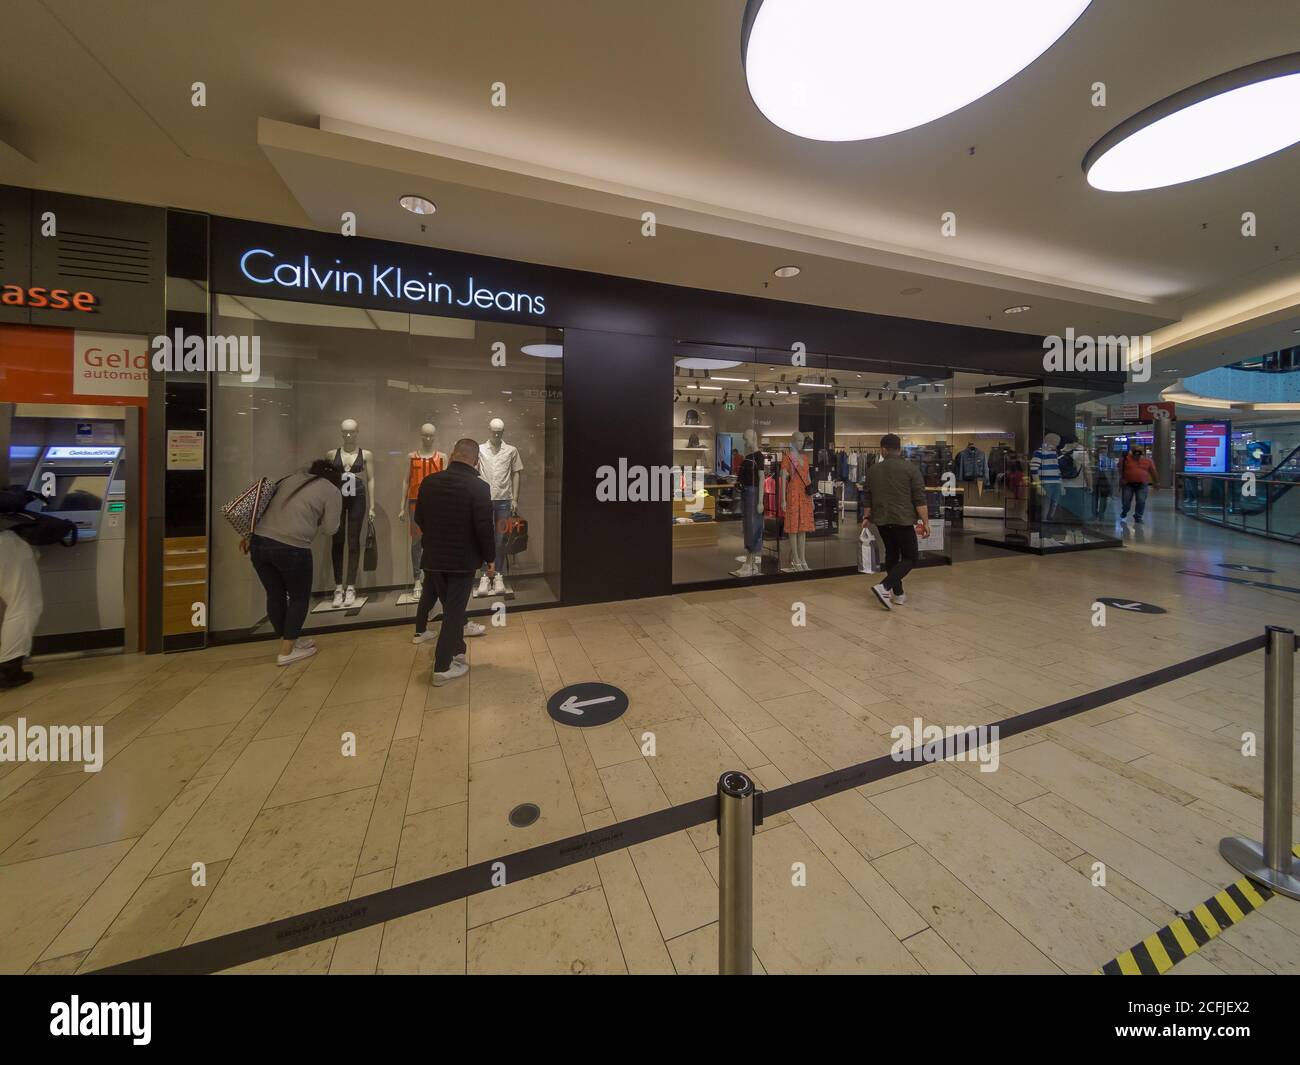 CALVIN KLEIN JEANS shop store front in Mall in Hannover, Germany,   CK is a famous american brand of jeans, shirts and luxury clothing Stock  Photo - Alamy